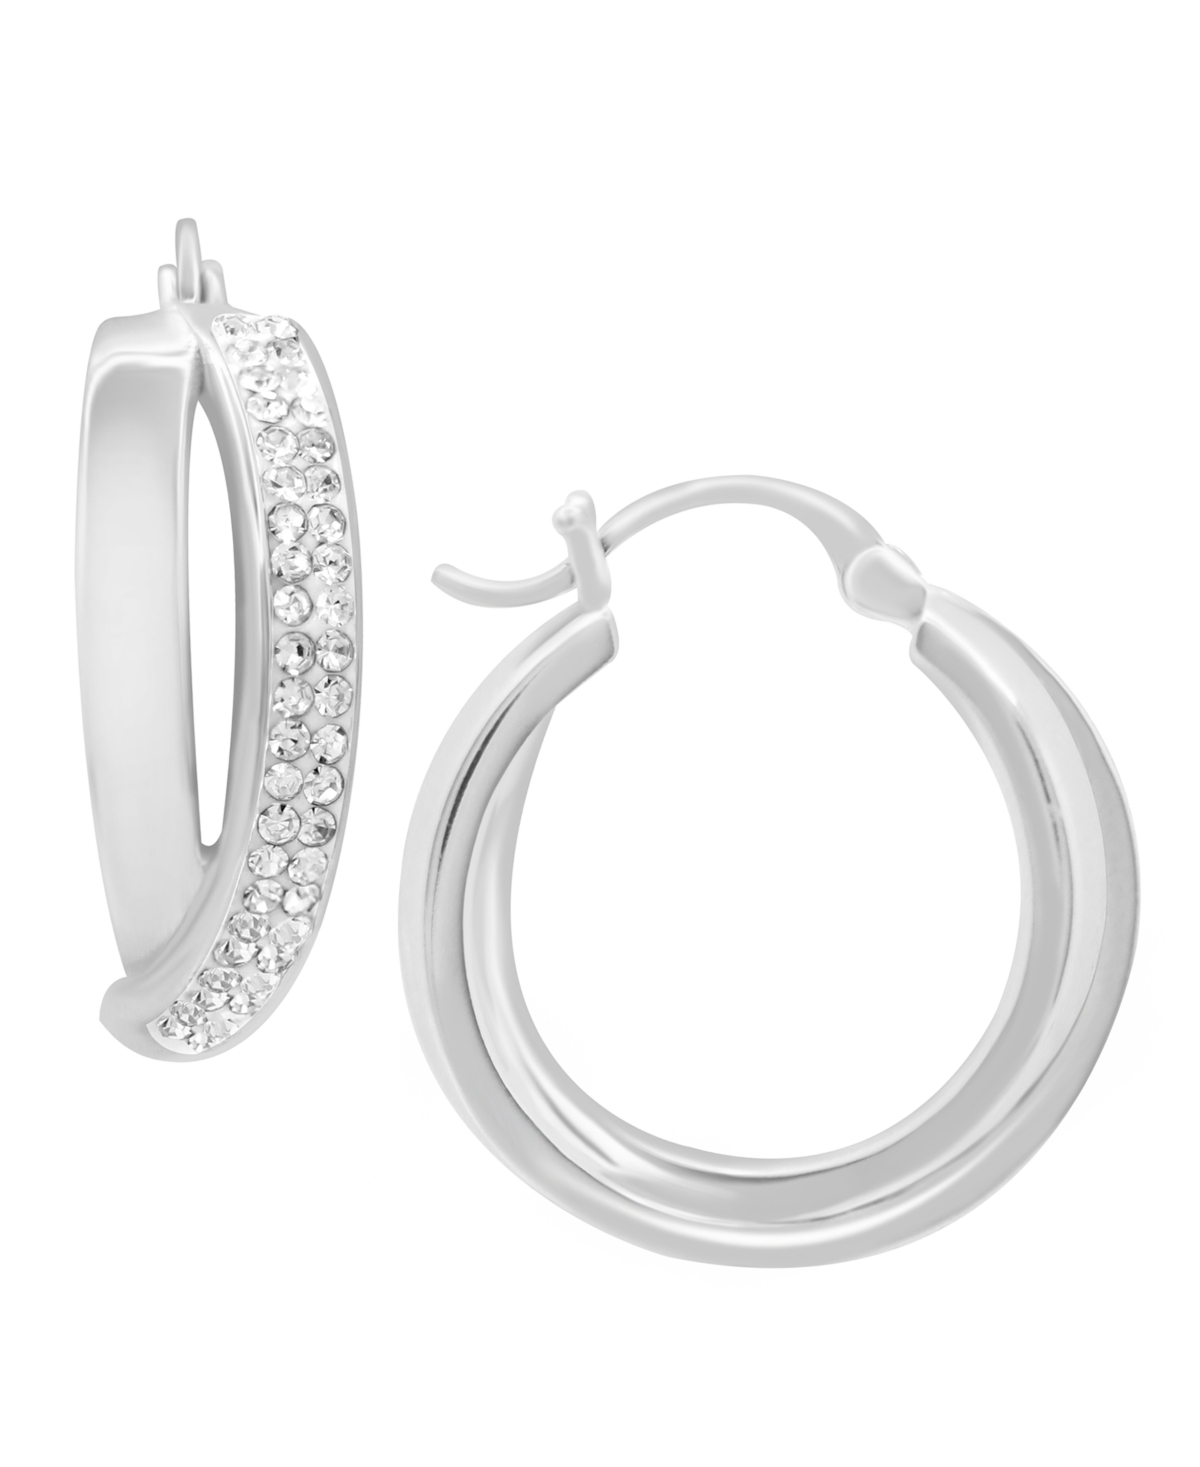 Crystal and High Polish Crossover Hoop Earring, Silver Plate - Silver-Tone